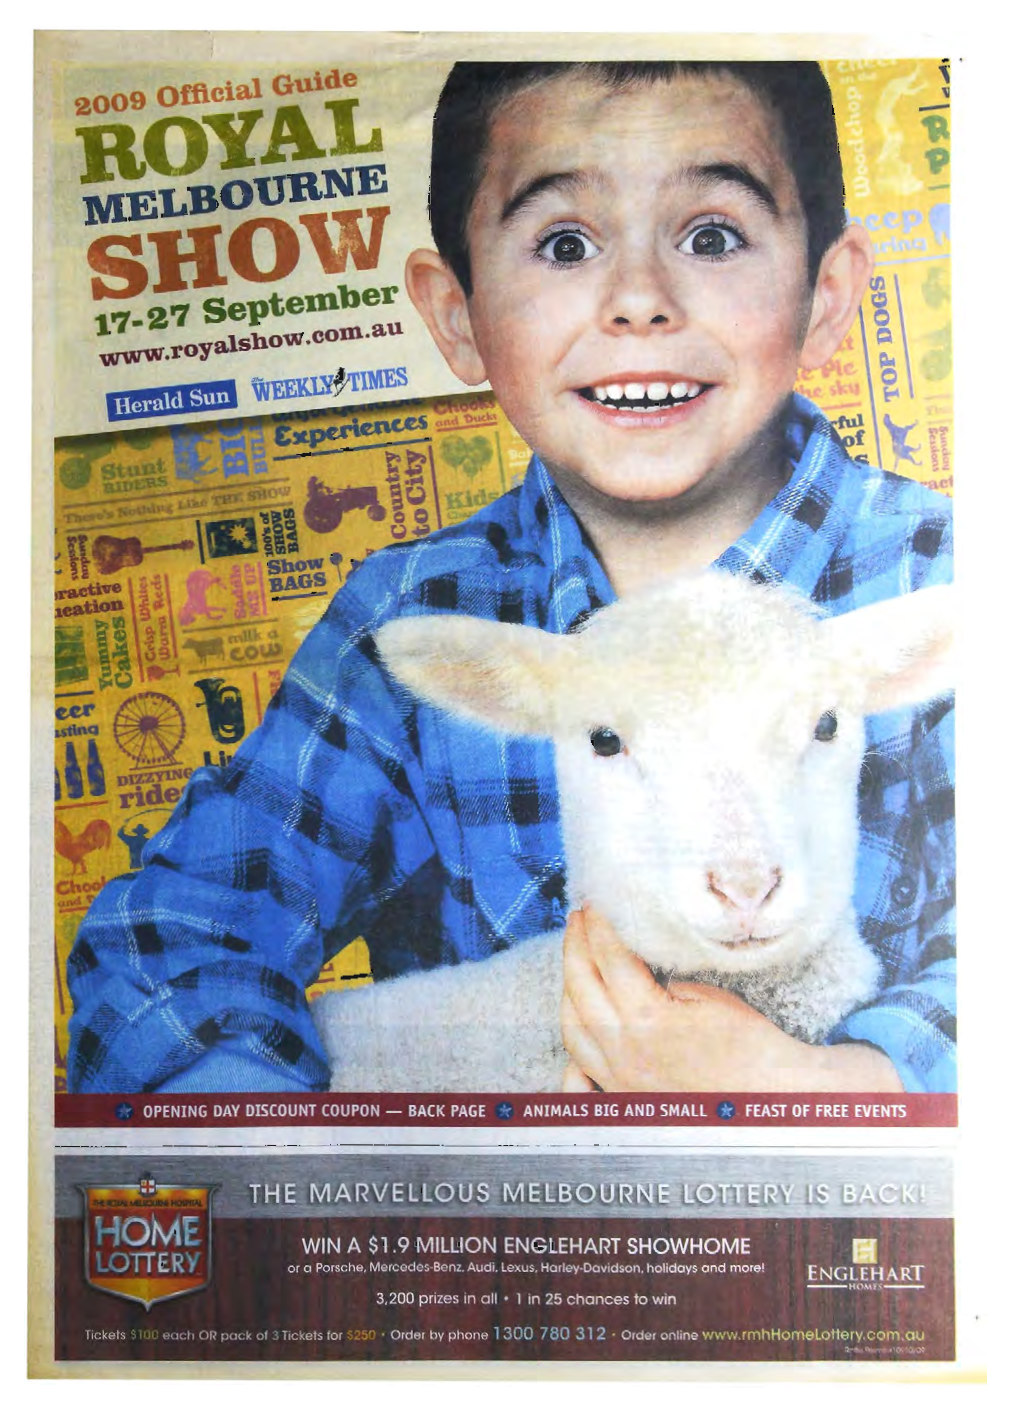 Show Guide 2009 • Herald Sun Creature the SHOW GIVES VISITORS of ALL AGES PLENTY of OPPORTUNITIES to GET BACK to GRASSROOTS